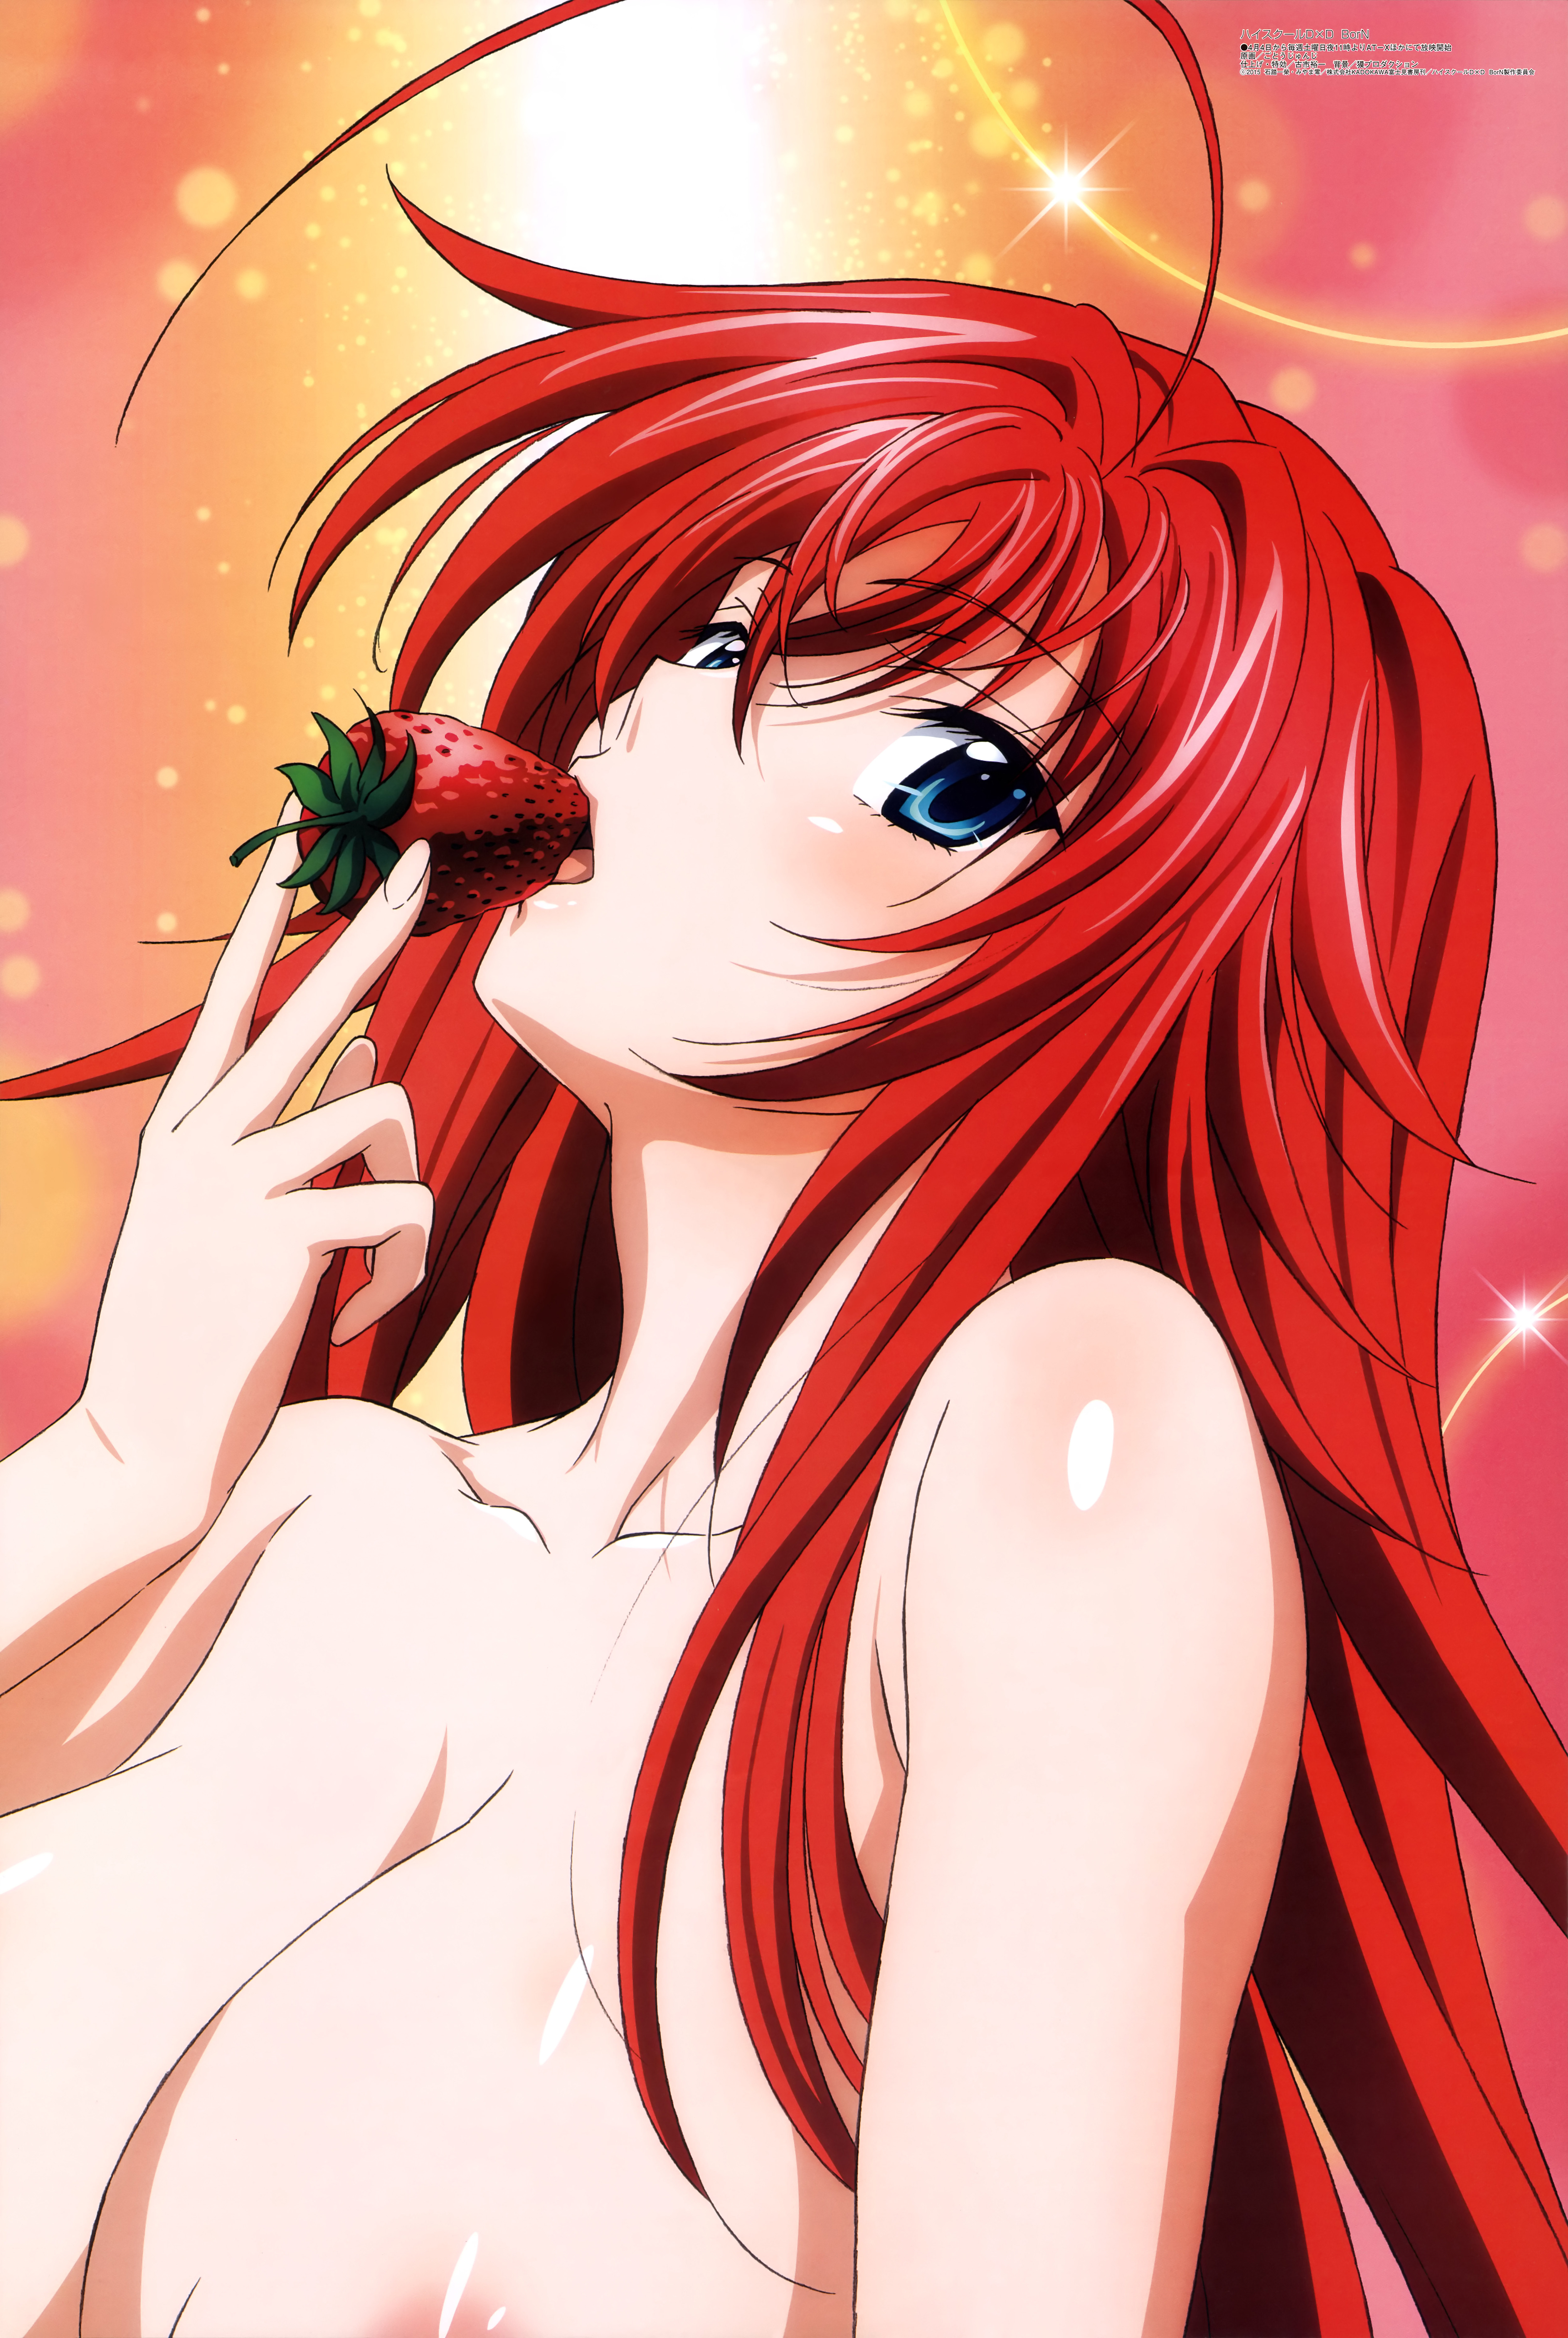 Megami-MAGAZINE-May-2015-anime-posters-highschool-dxd